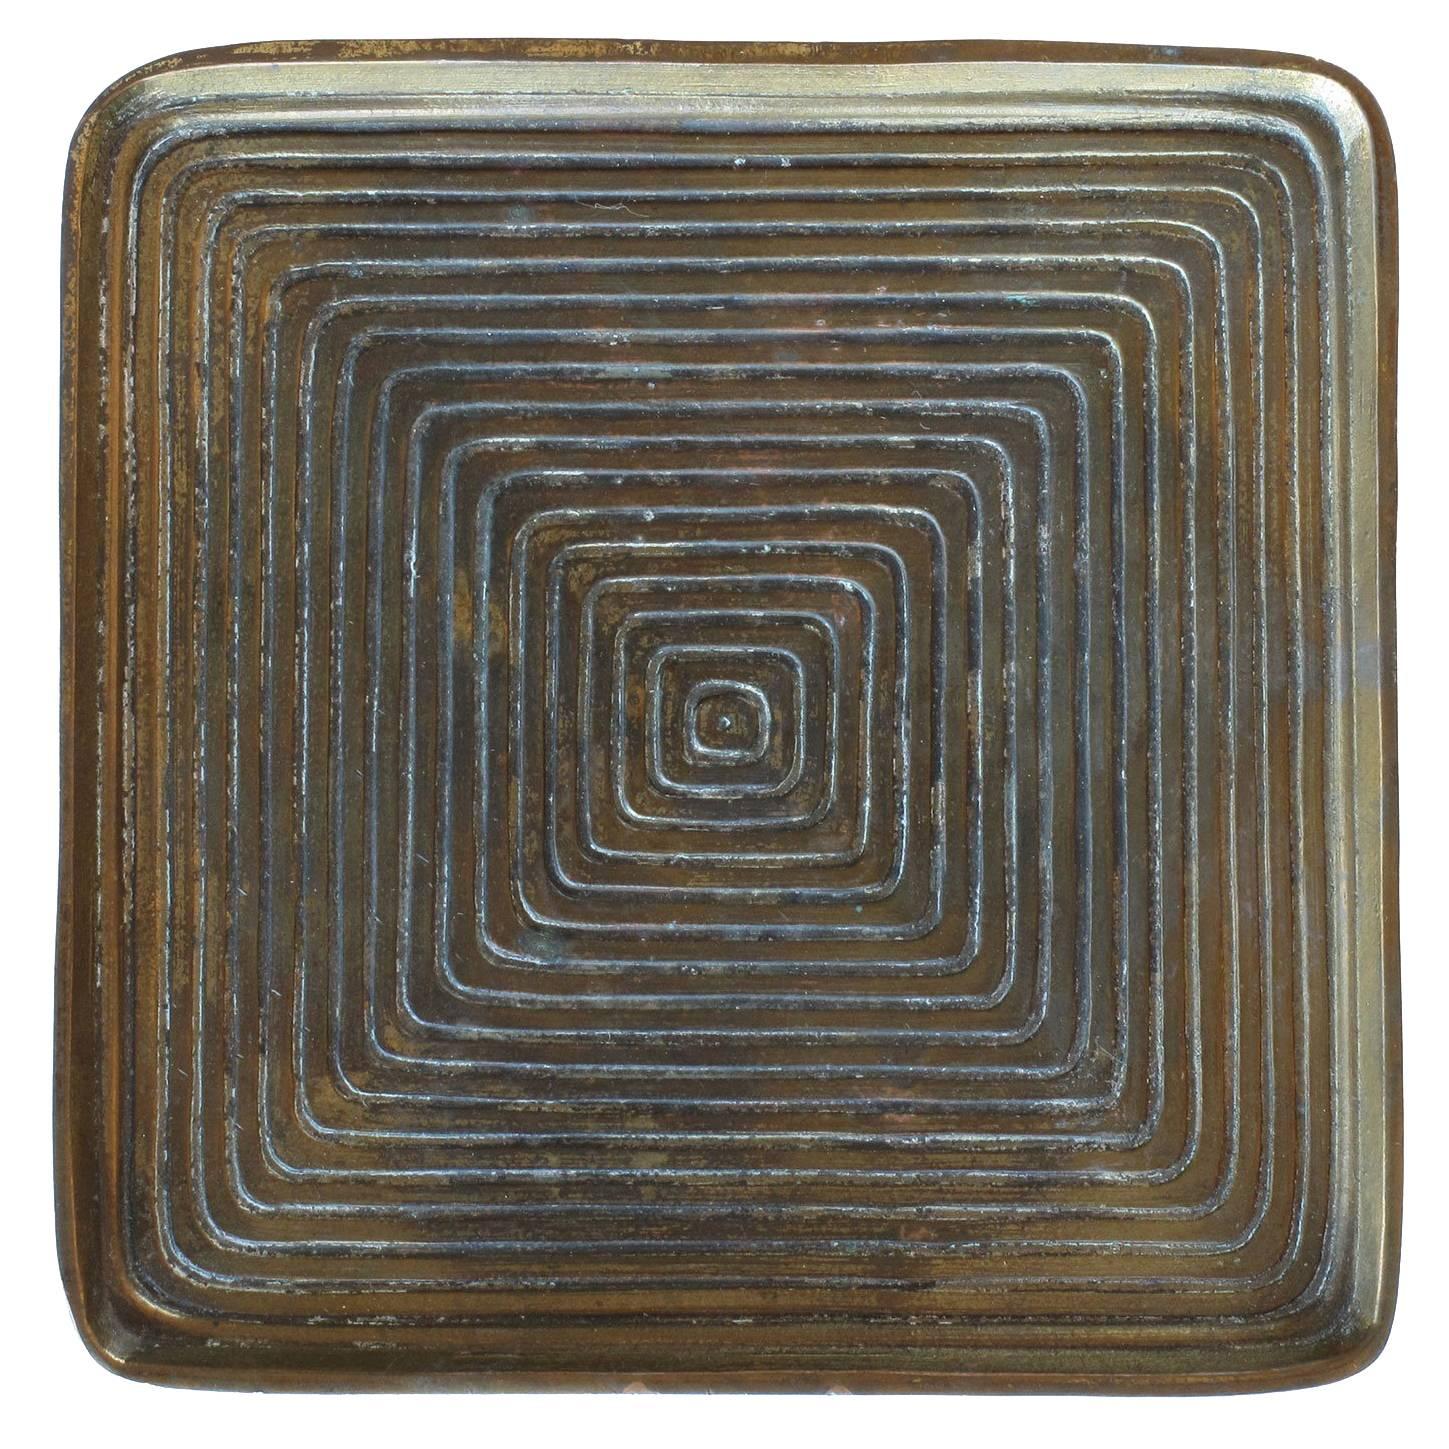 Ben Seibel Square Shaped Brass Tray with Concentric Squares Design Jenfred Ware For Sale